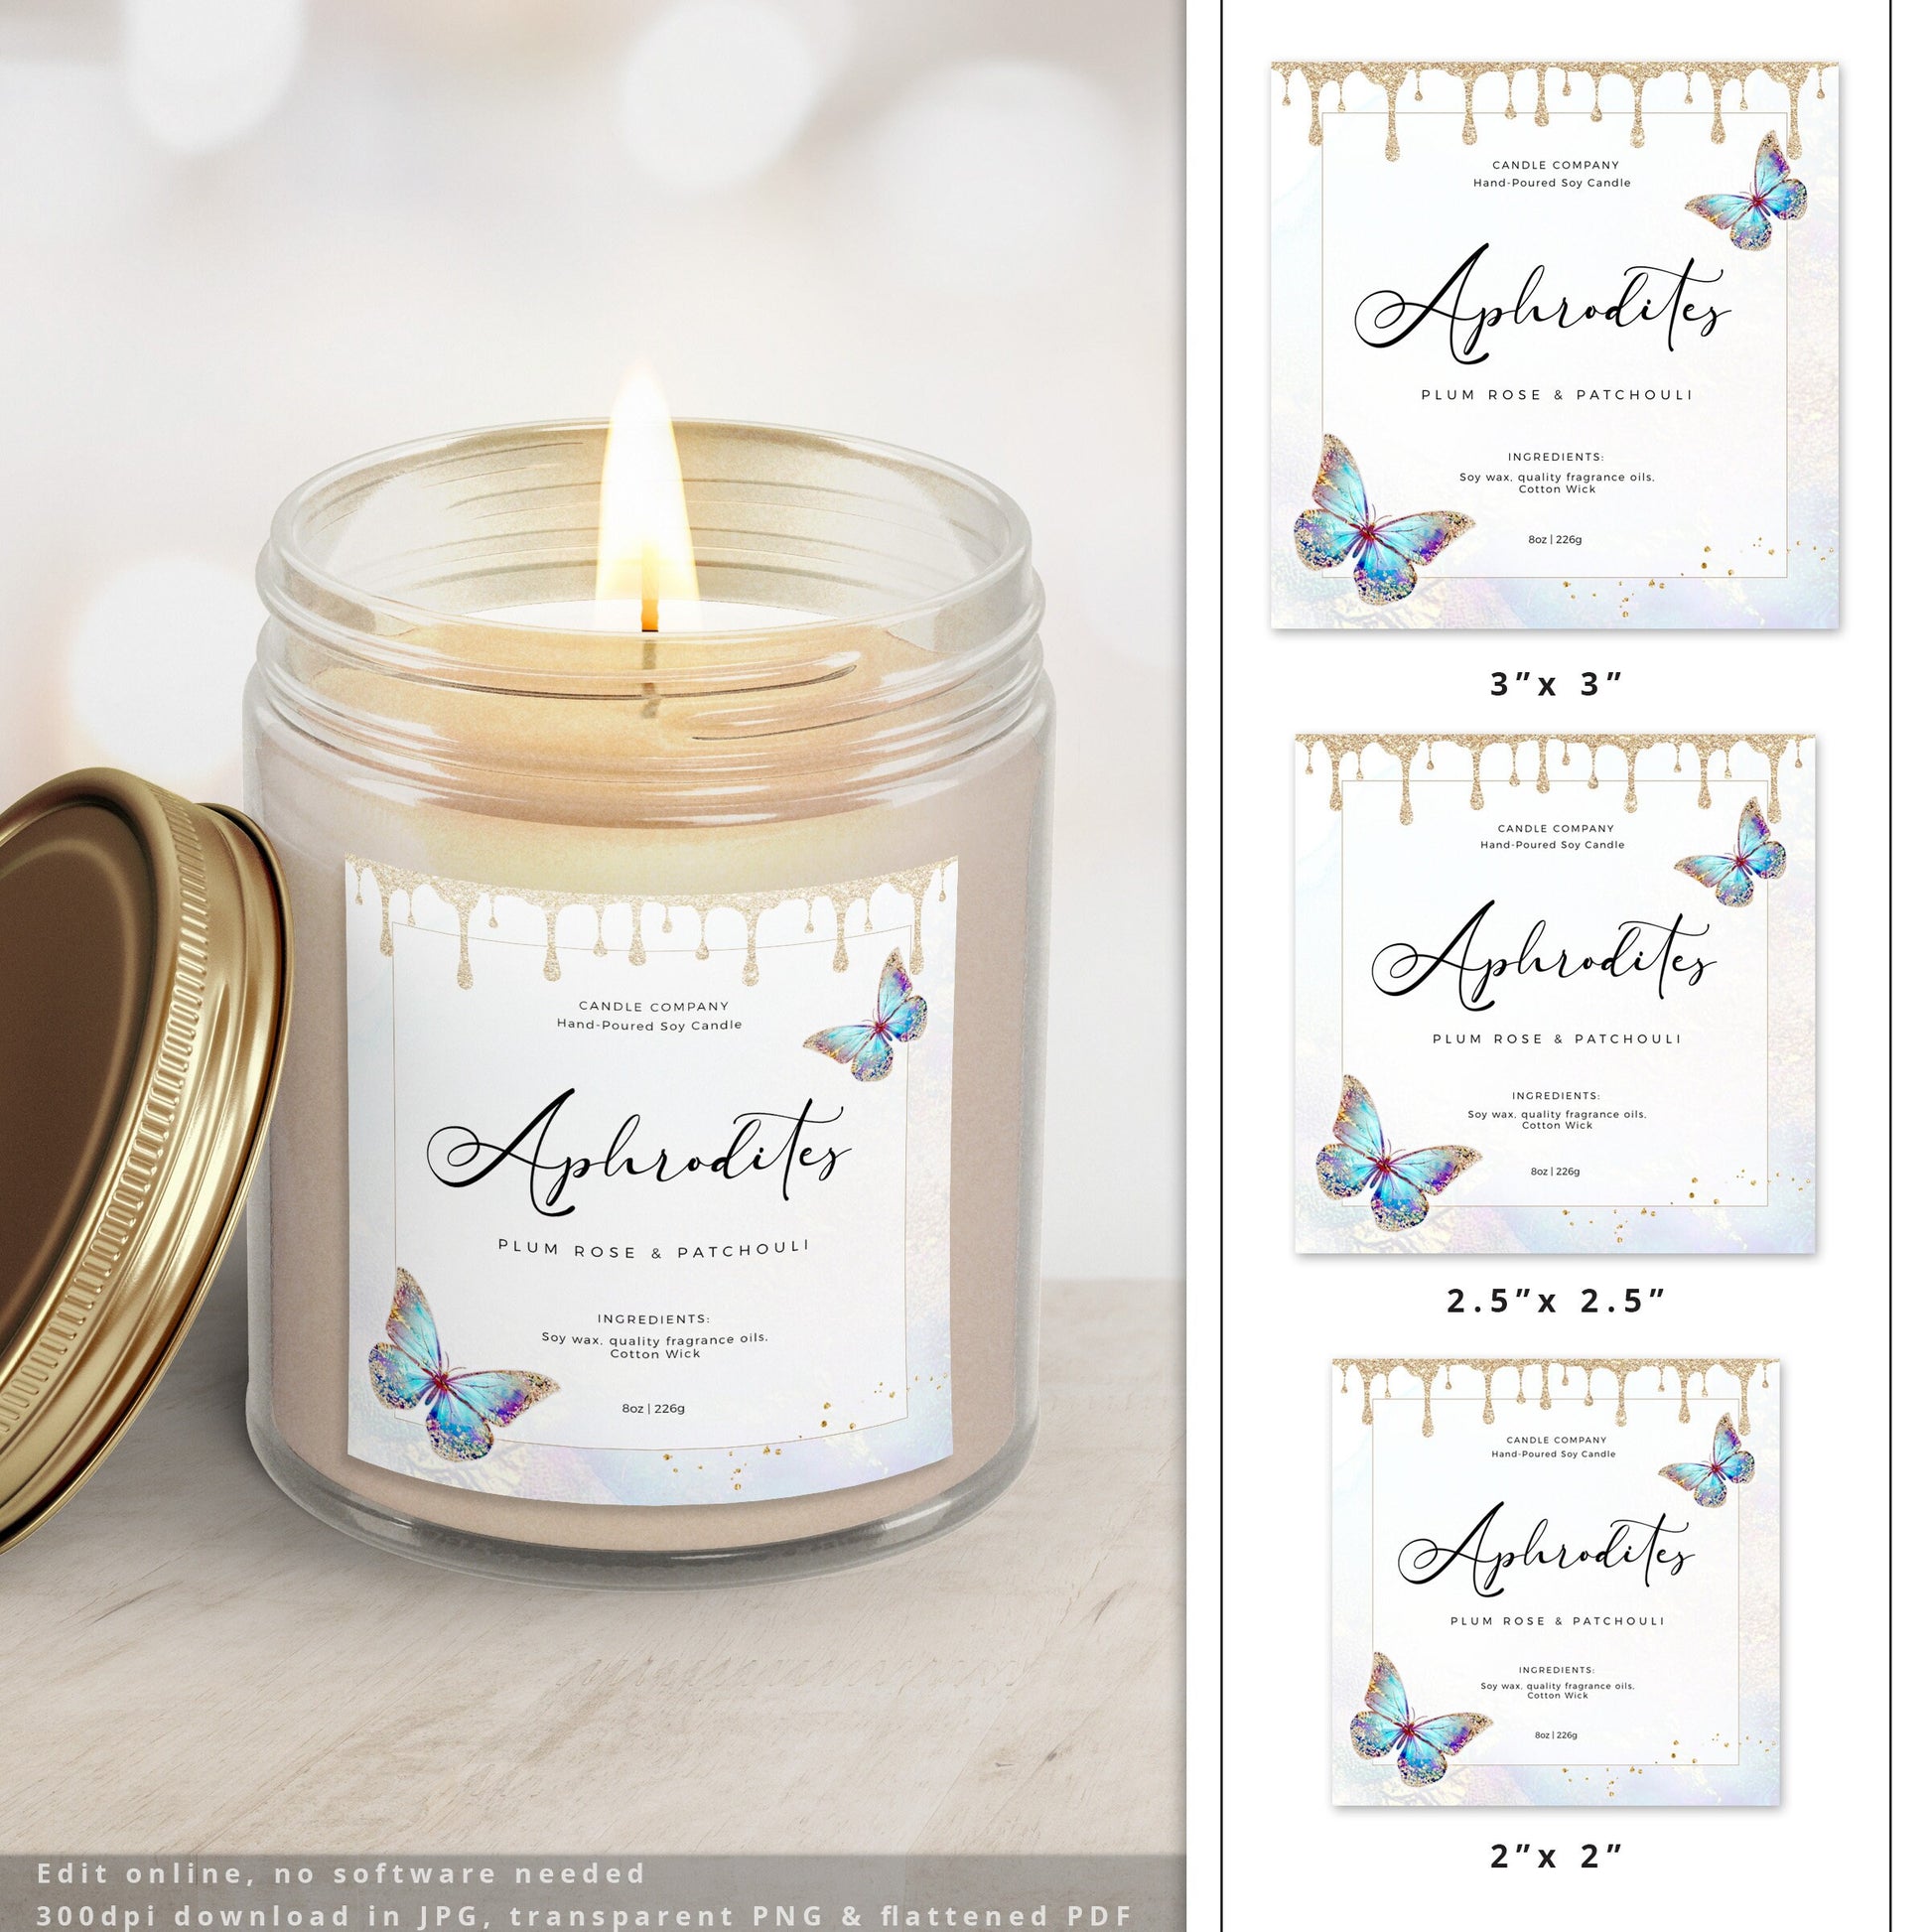 Editable Square Candle Label Template, DIY Edit Mystical Butterfly Spa